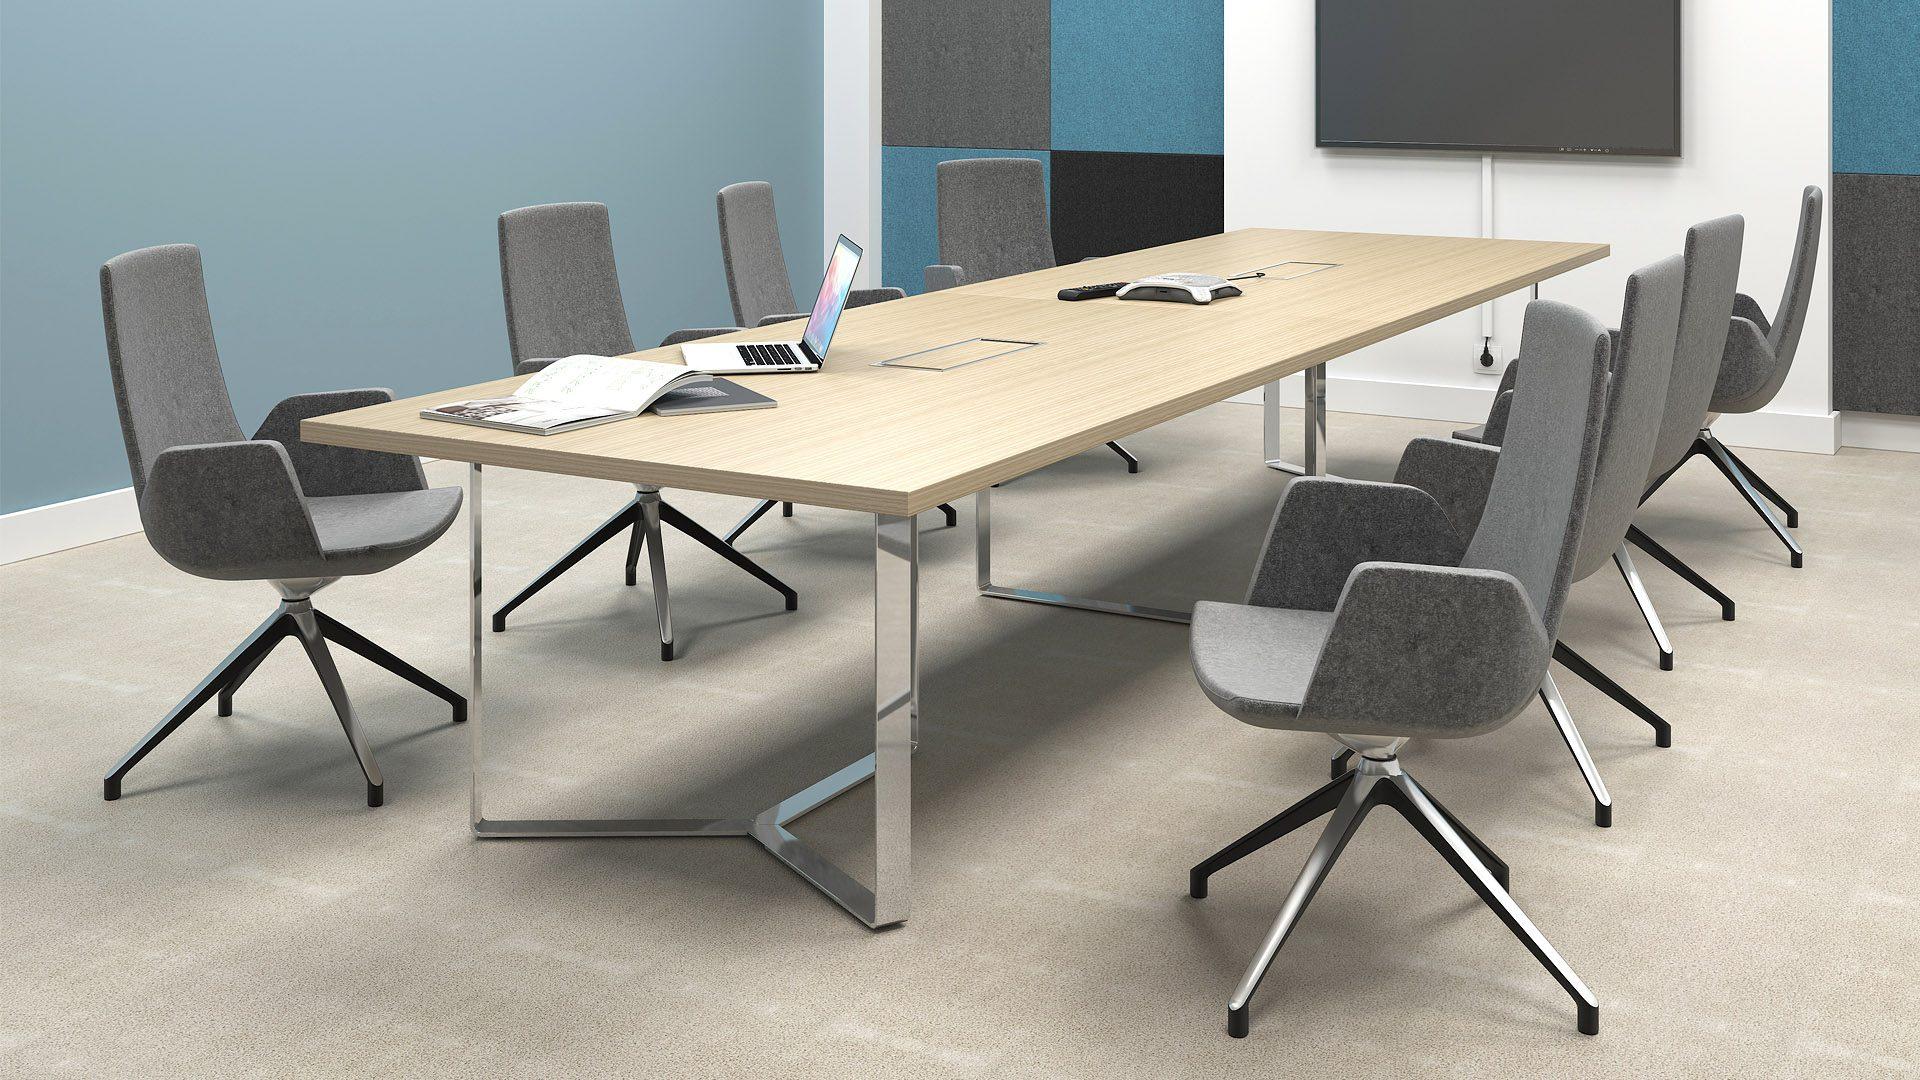 Plana board room meeting table in chrome with North Cape swivel base meeting chairs